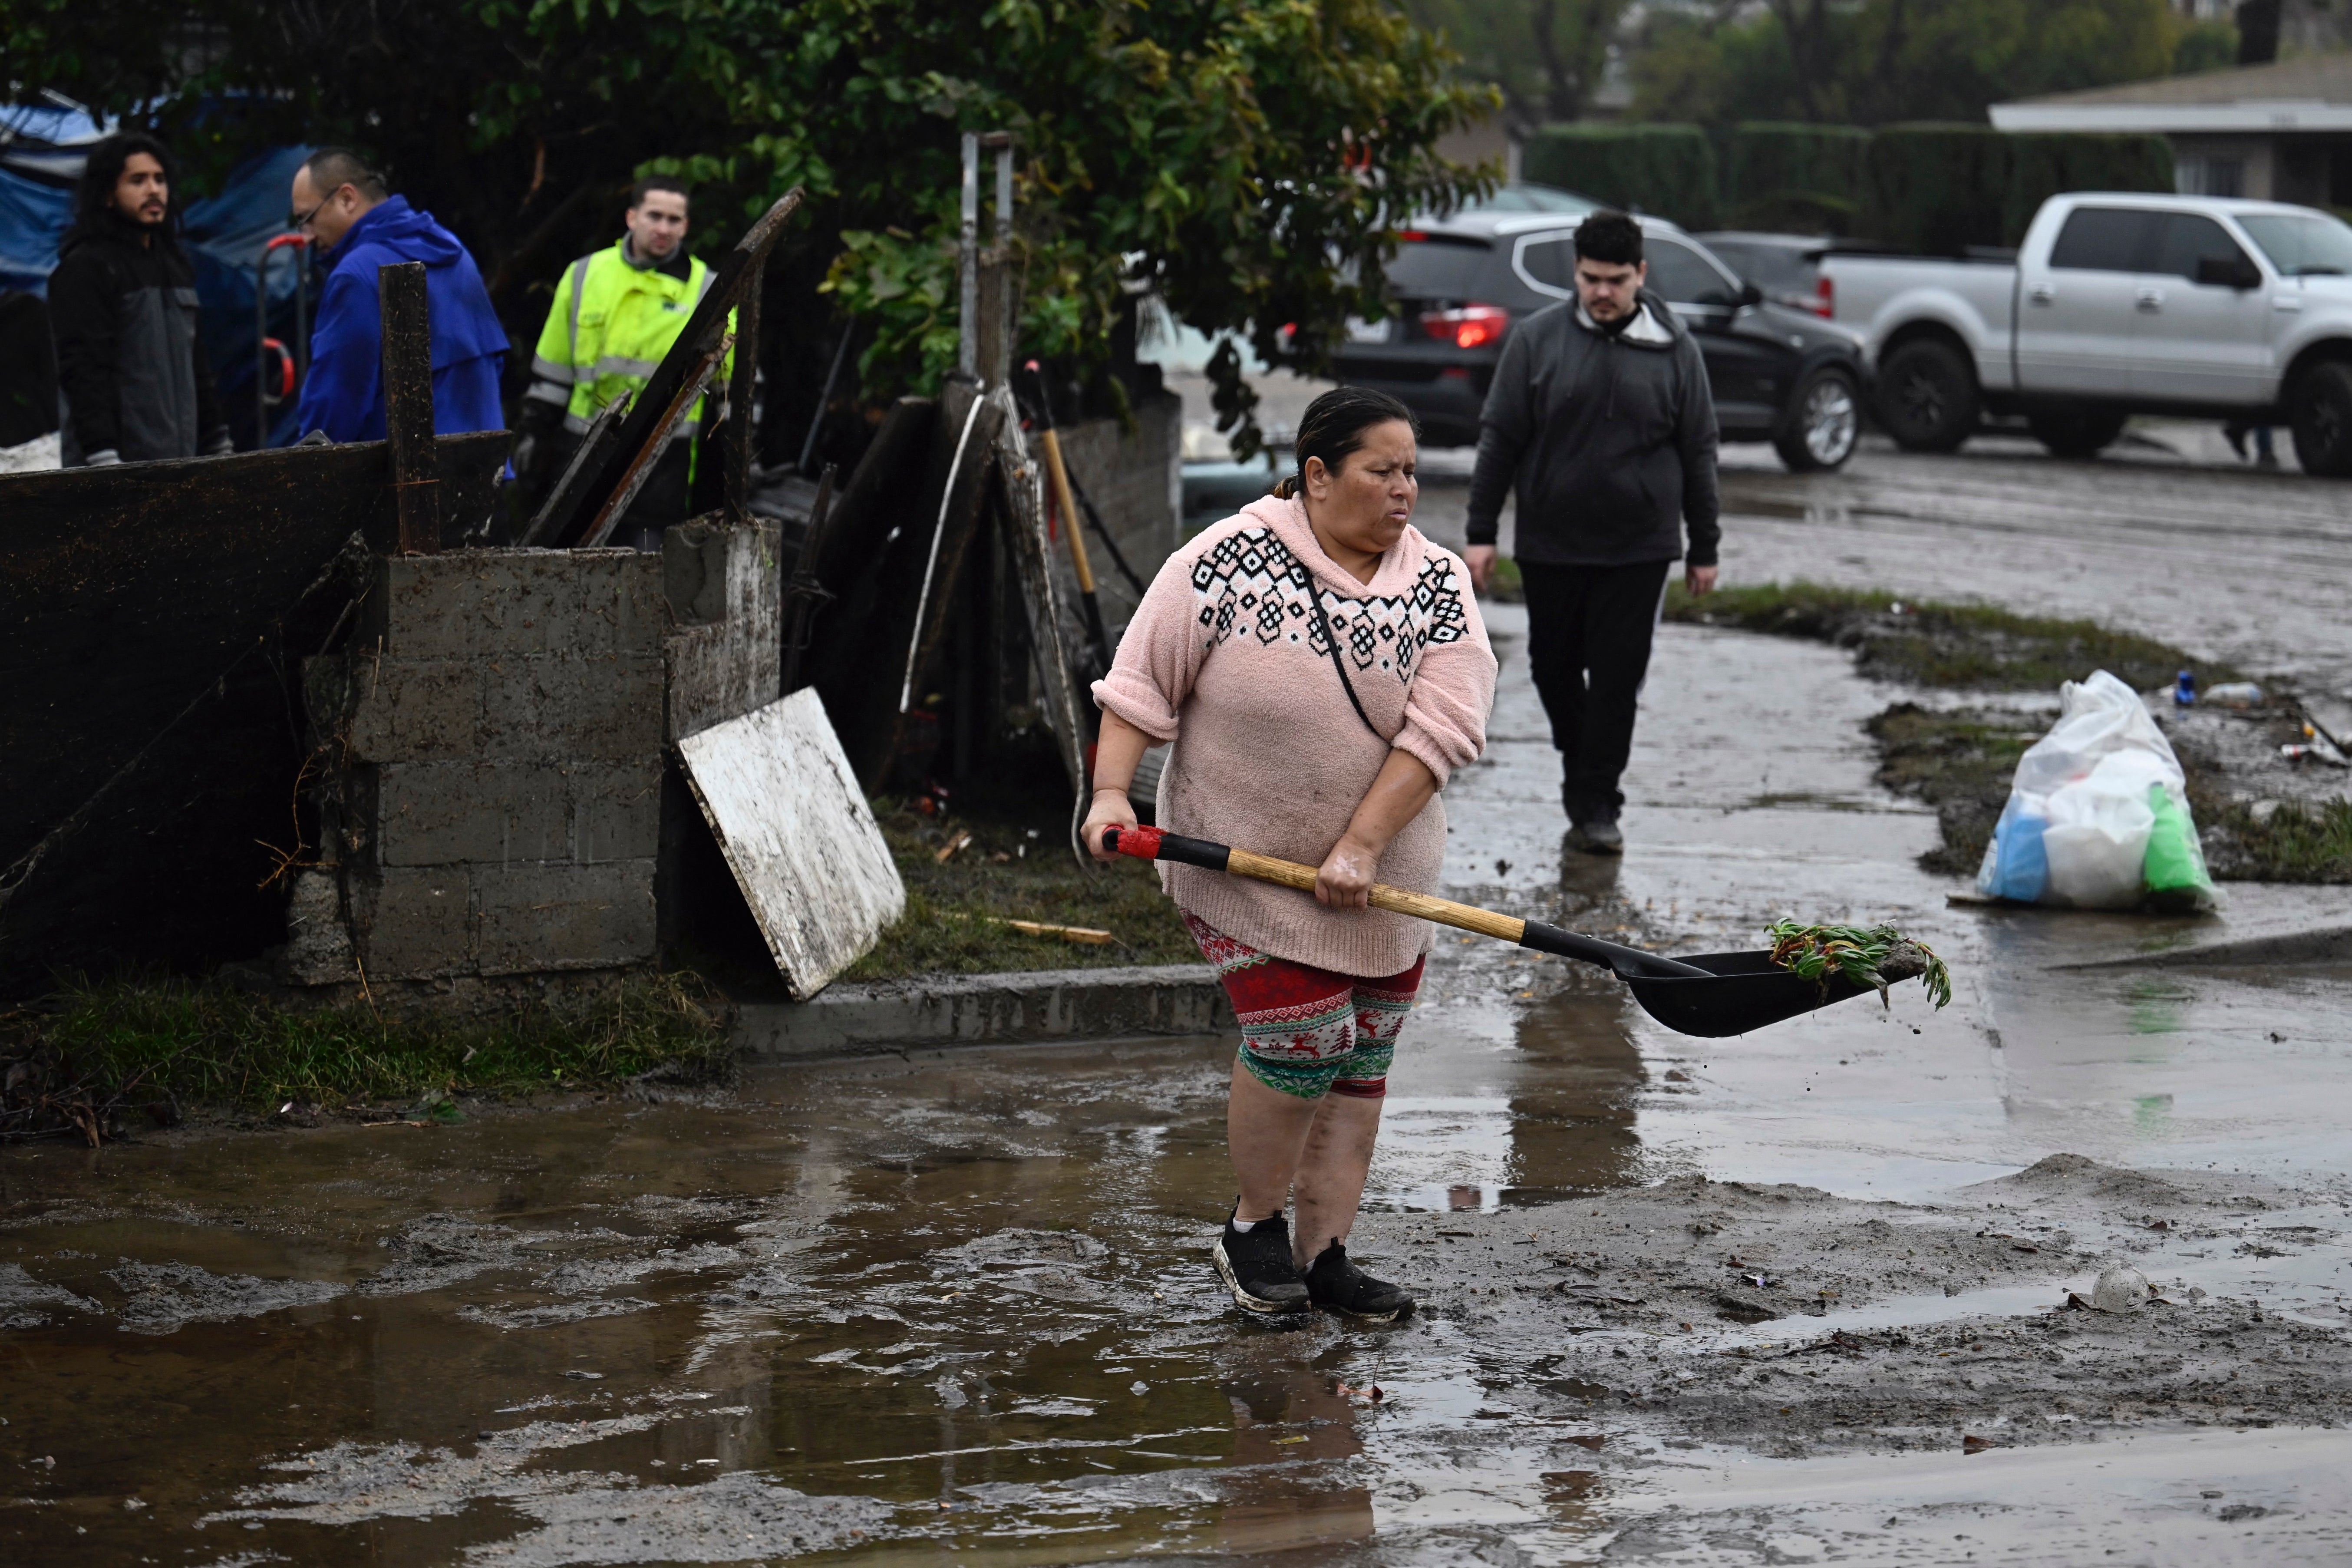 A woman removes debris from floods on Monday